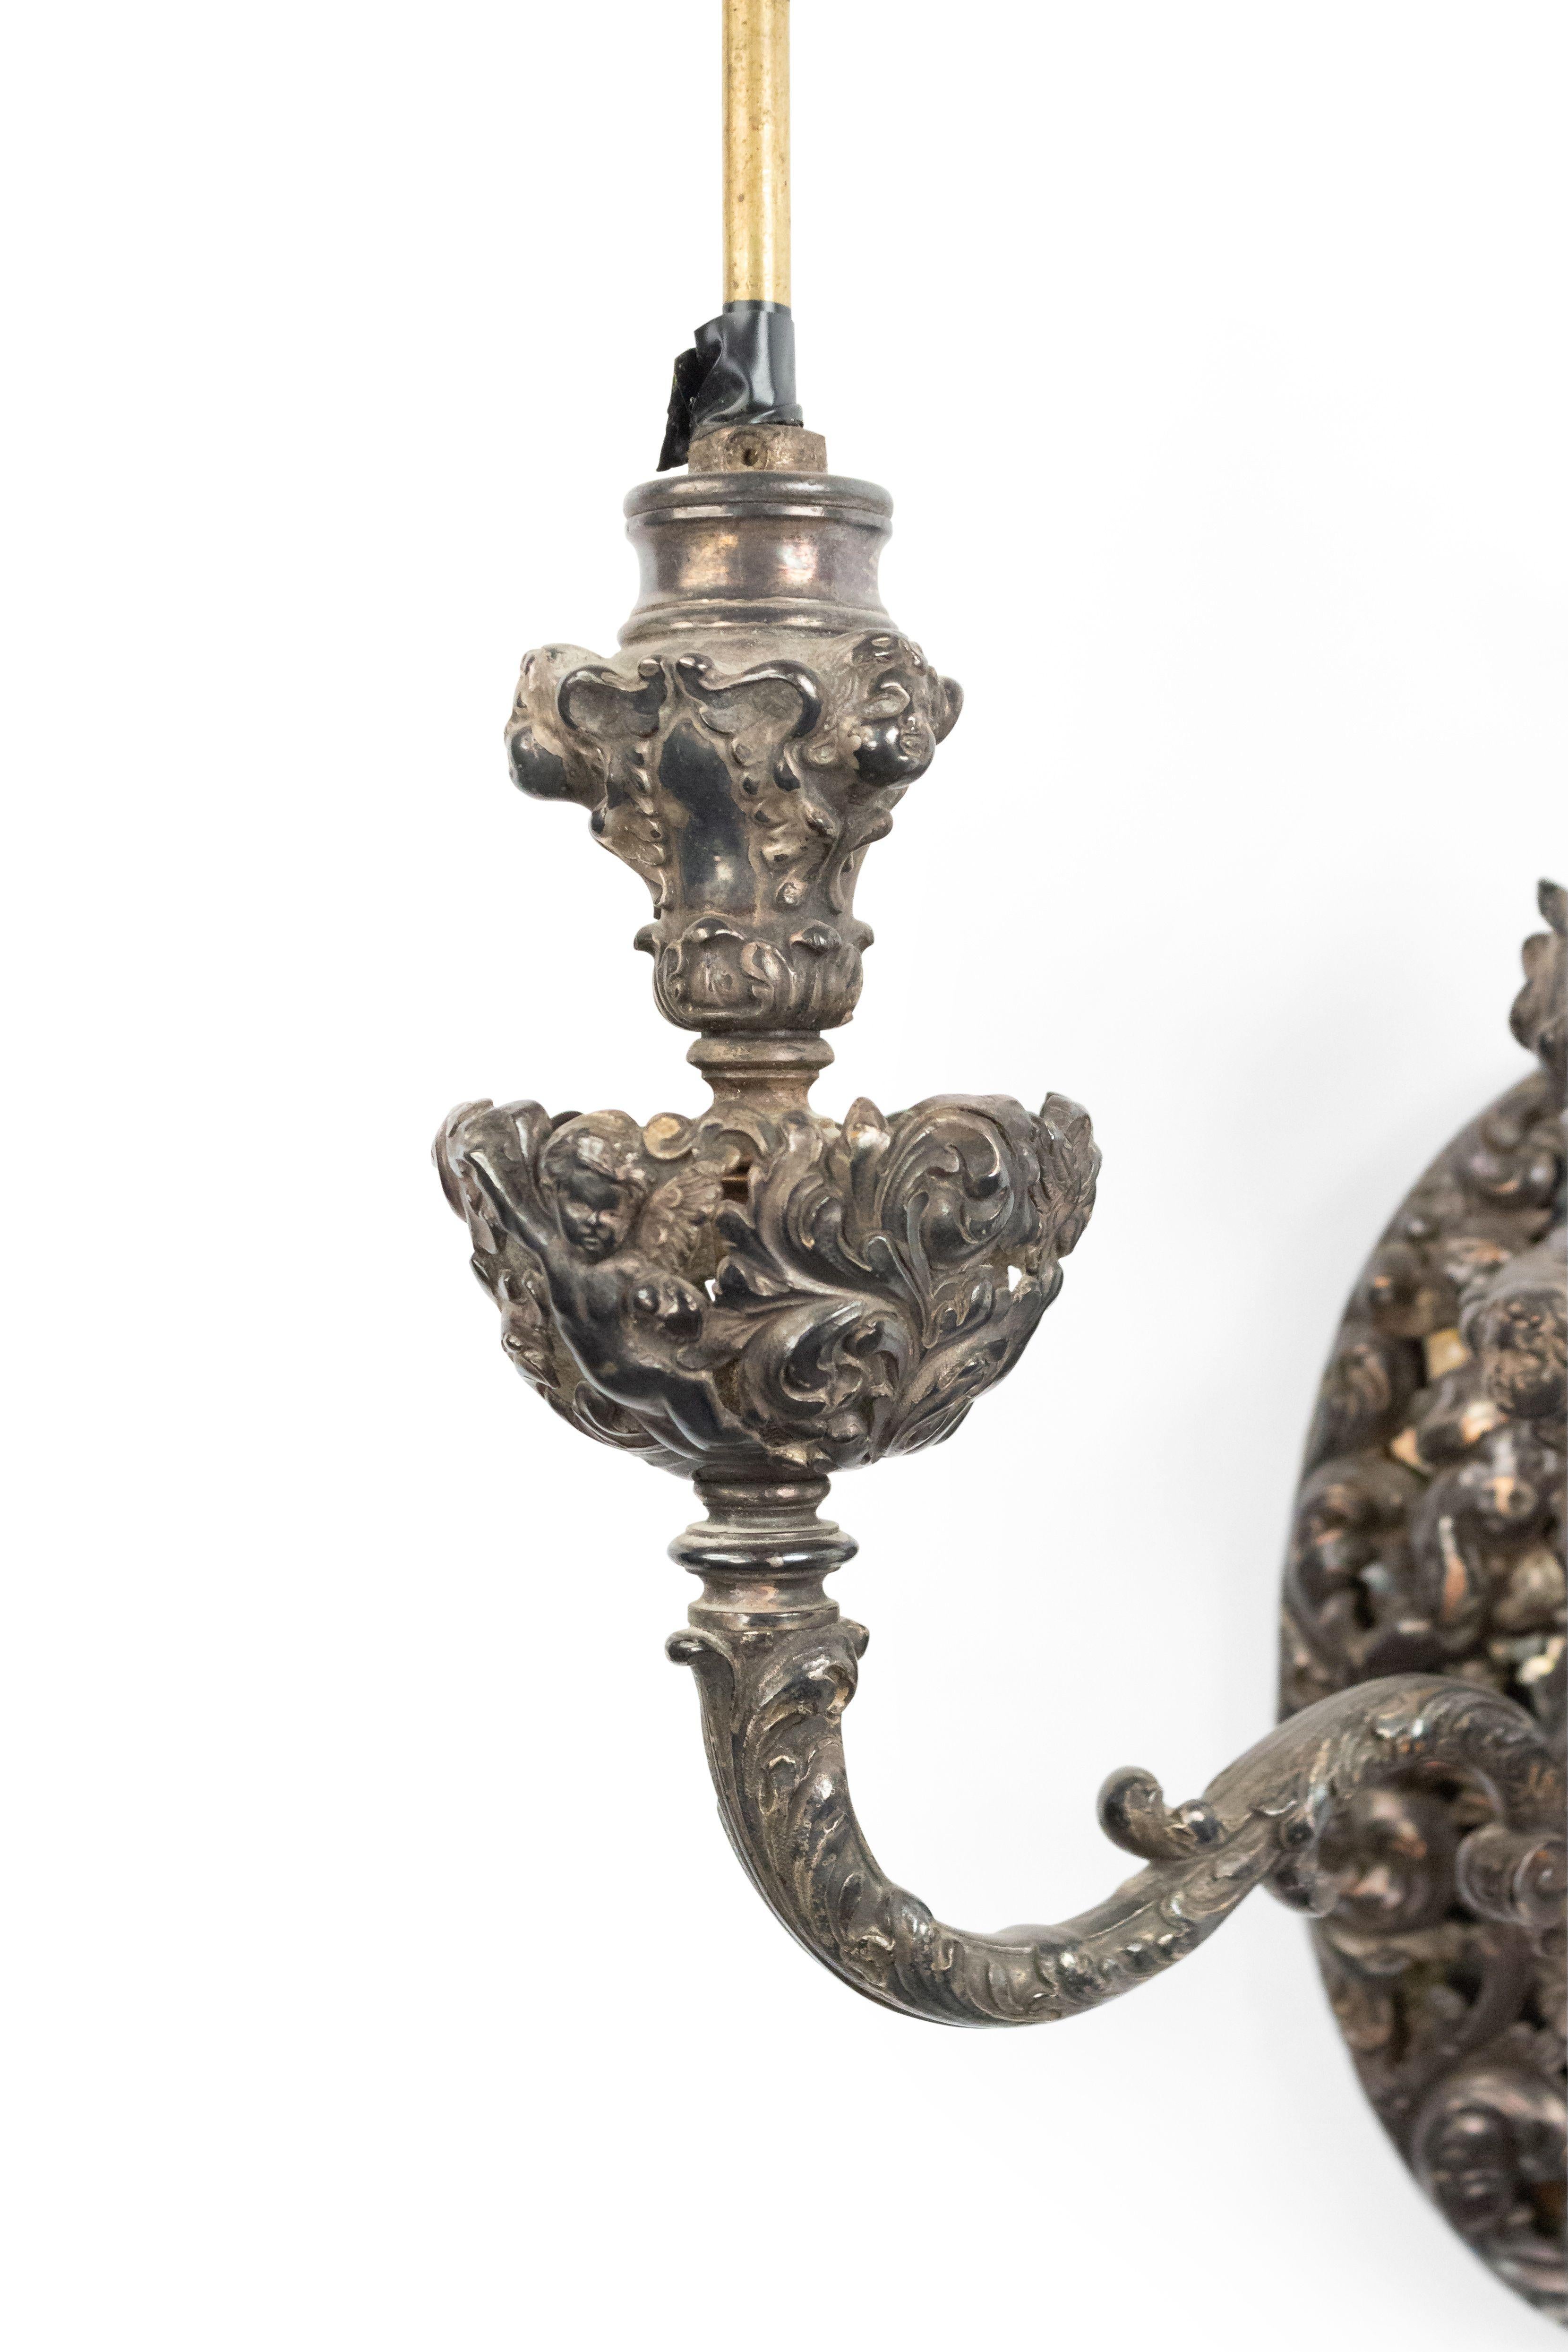 Pair of French Victorian silver plate scroll and filigree 2 arm wall sconces with flame finial top and cupid heads.